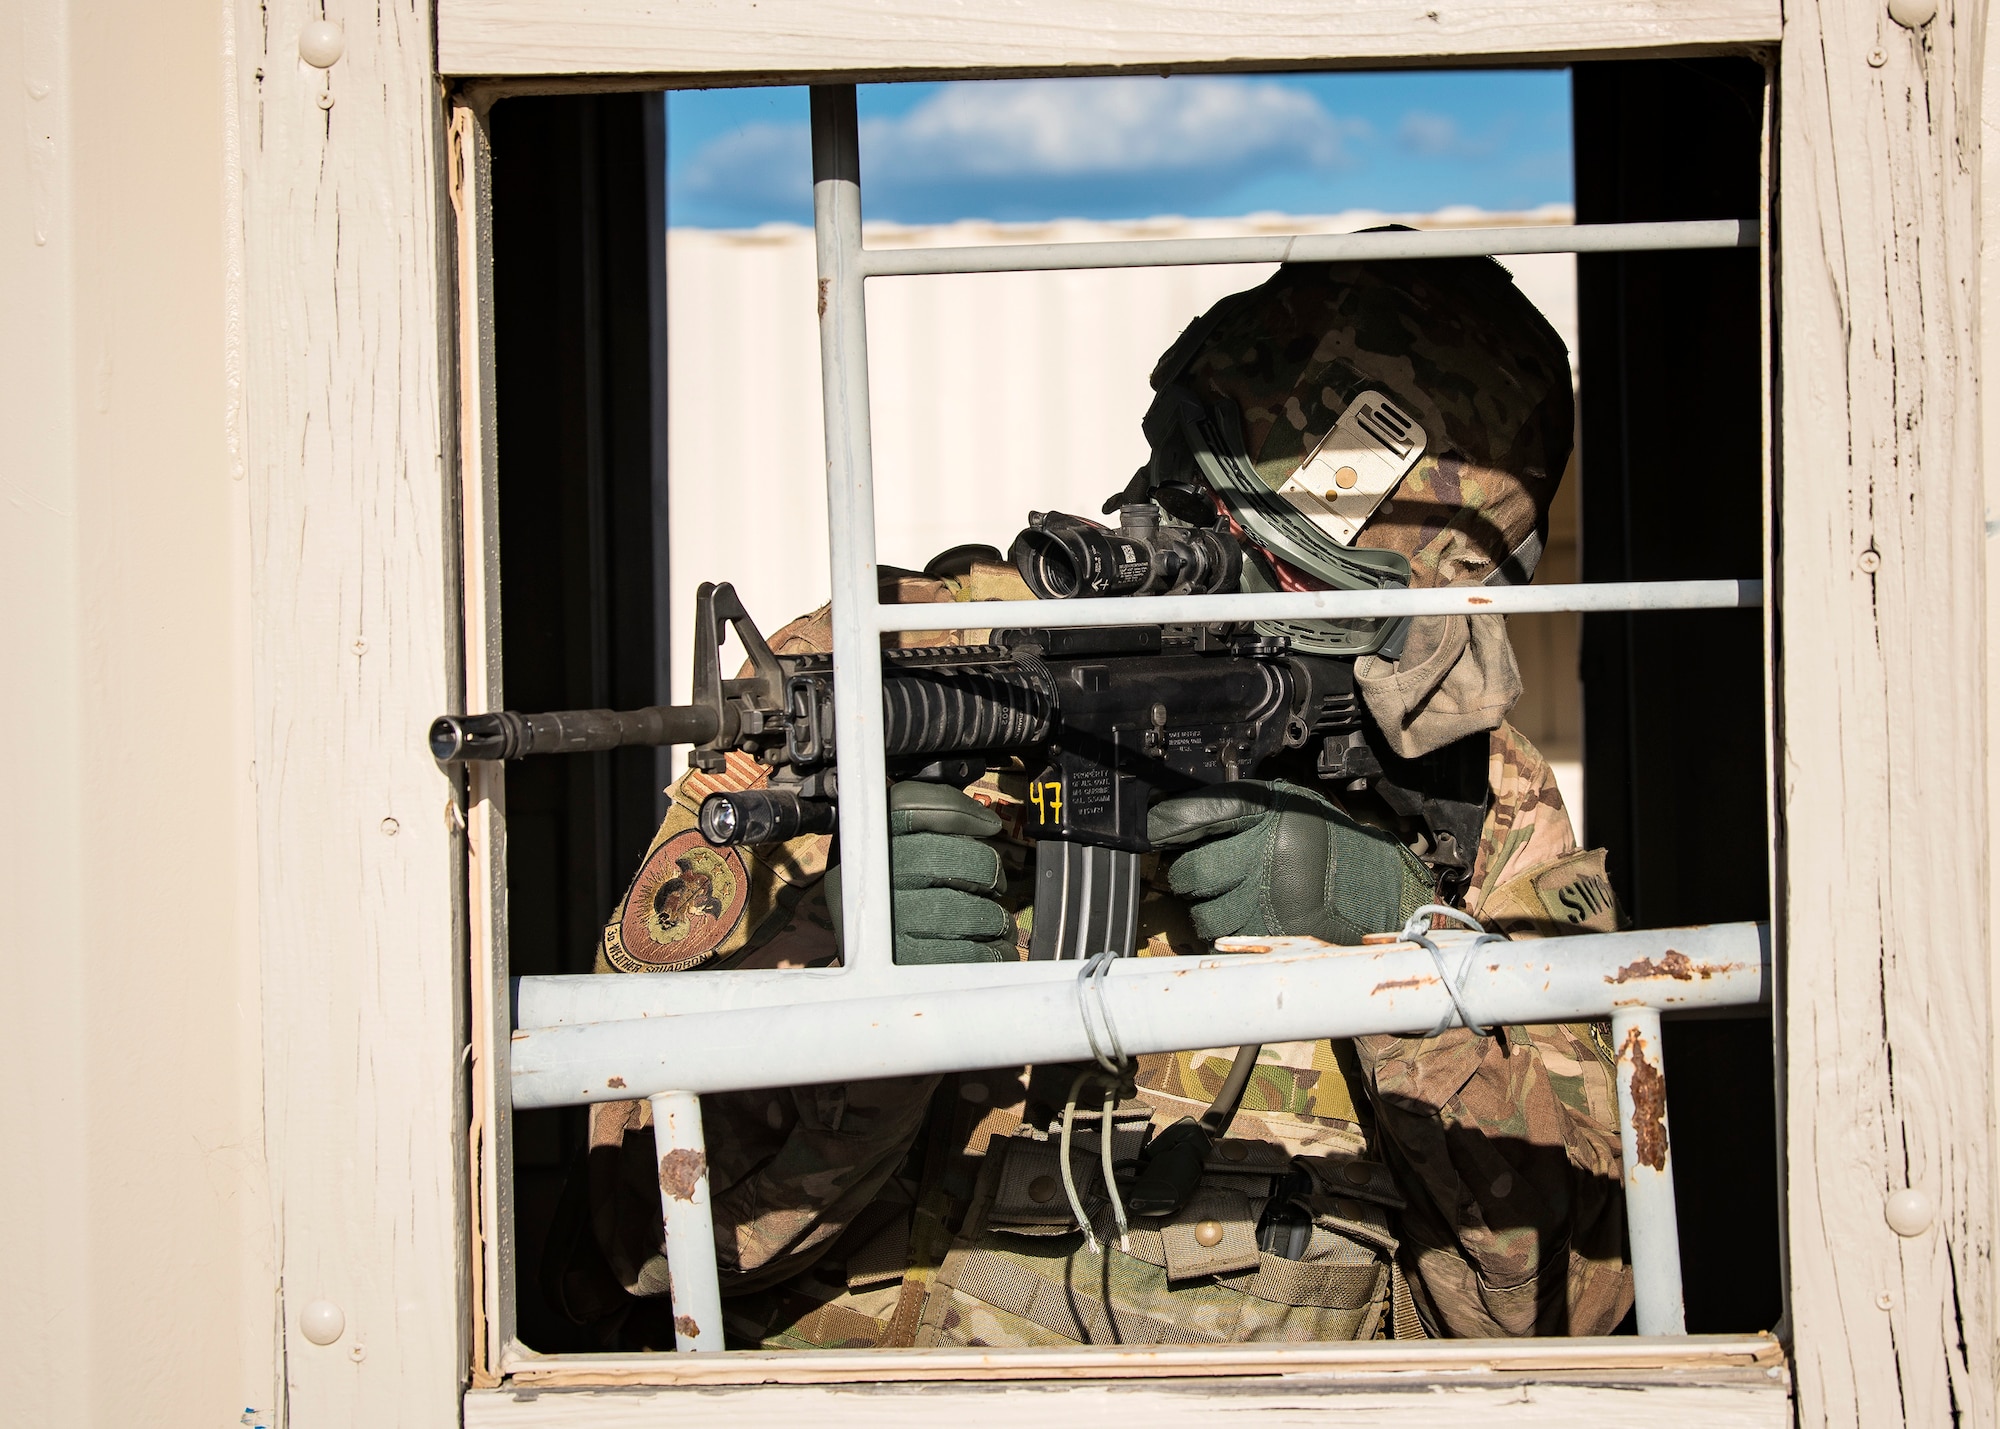 A Staff Weather Officer from the 3d Weather Squadron, fires an M4 Carbine during a certification field exercise (CFX), July 29, 2019, at Camp Bowie Training Center, Texas. The CFX was designed to evaluate the squadron’s overall tactical ability and readiness to provide the U.S. Army with full spectrum environmental support to the Joint Task Force (JTF) fight. The CFX immersed Airmen into all the aspects of what could come with a deployment such as force on force scenarios. (U.S. Air Force photo by Airman 1st Class Eugene Oliver)